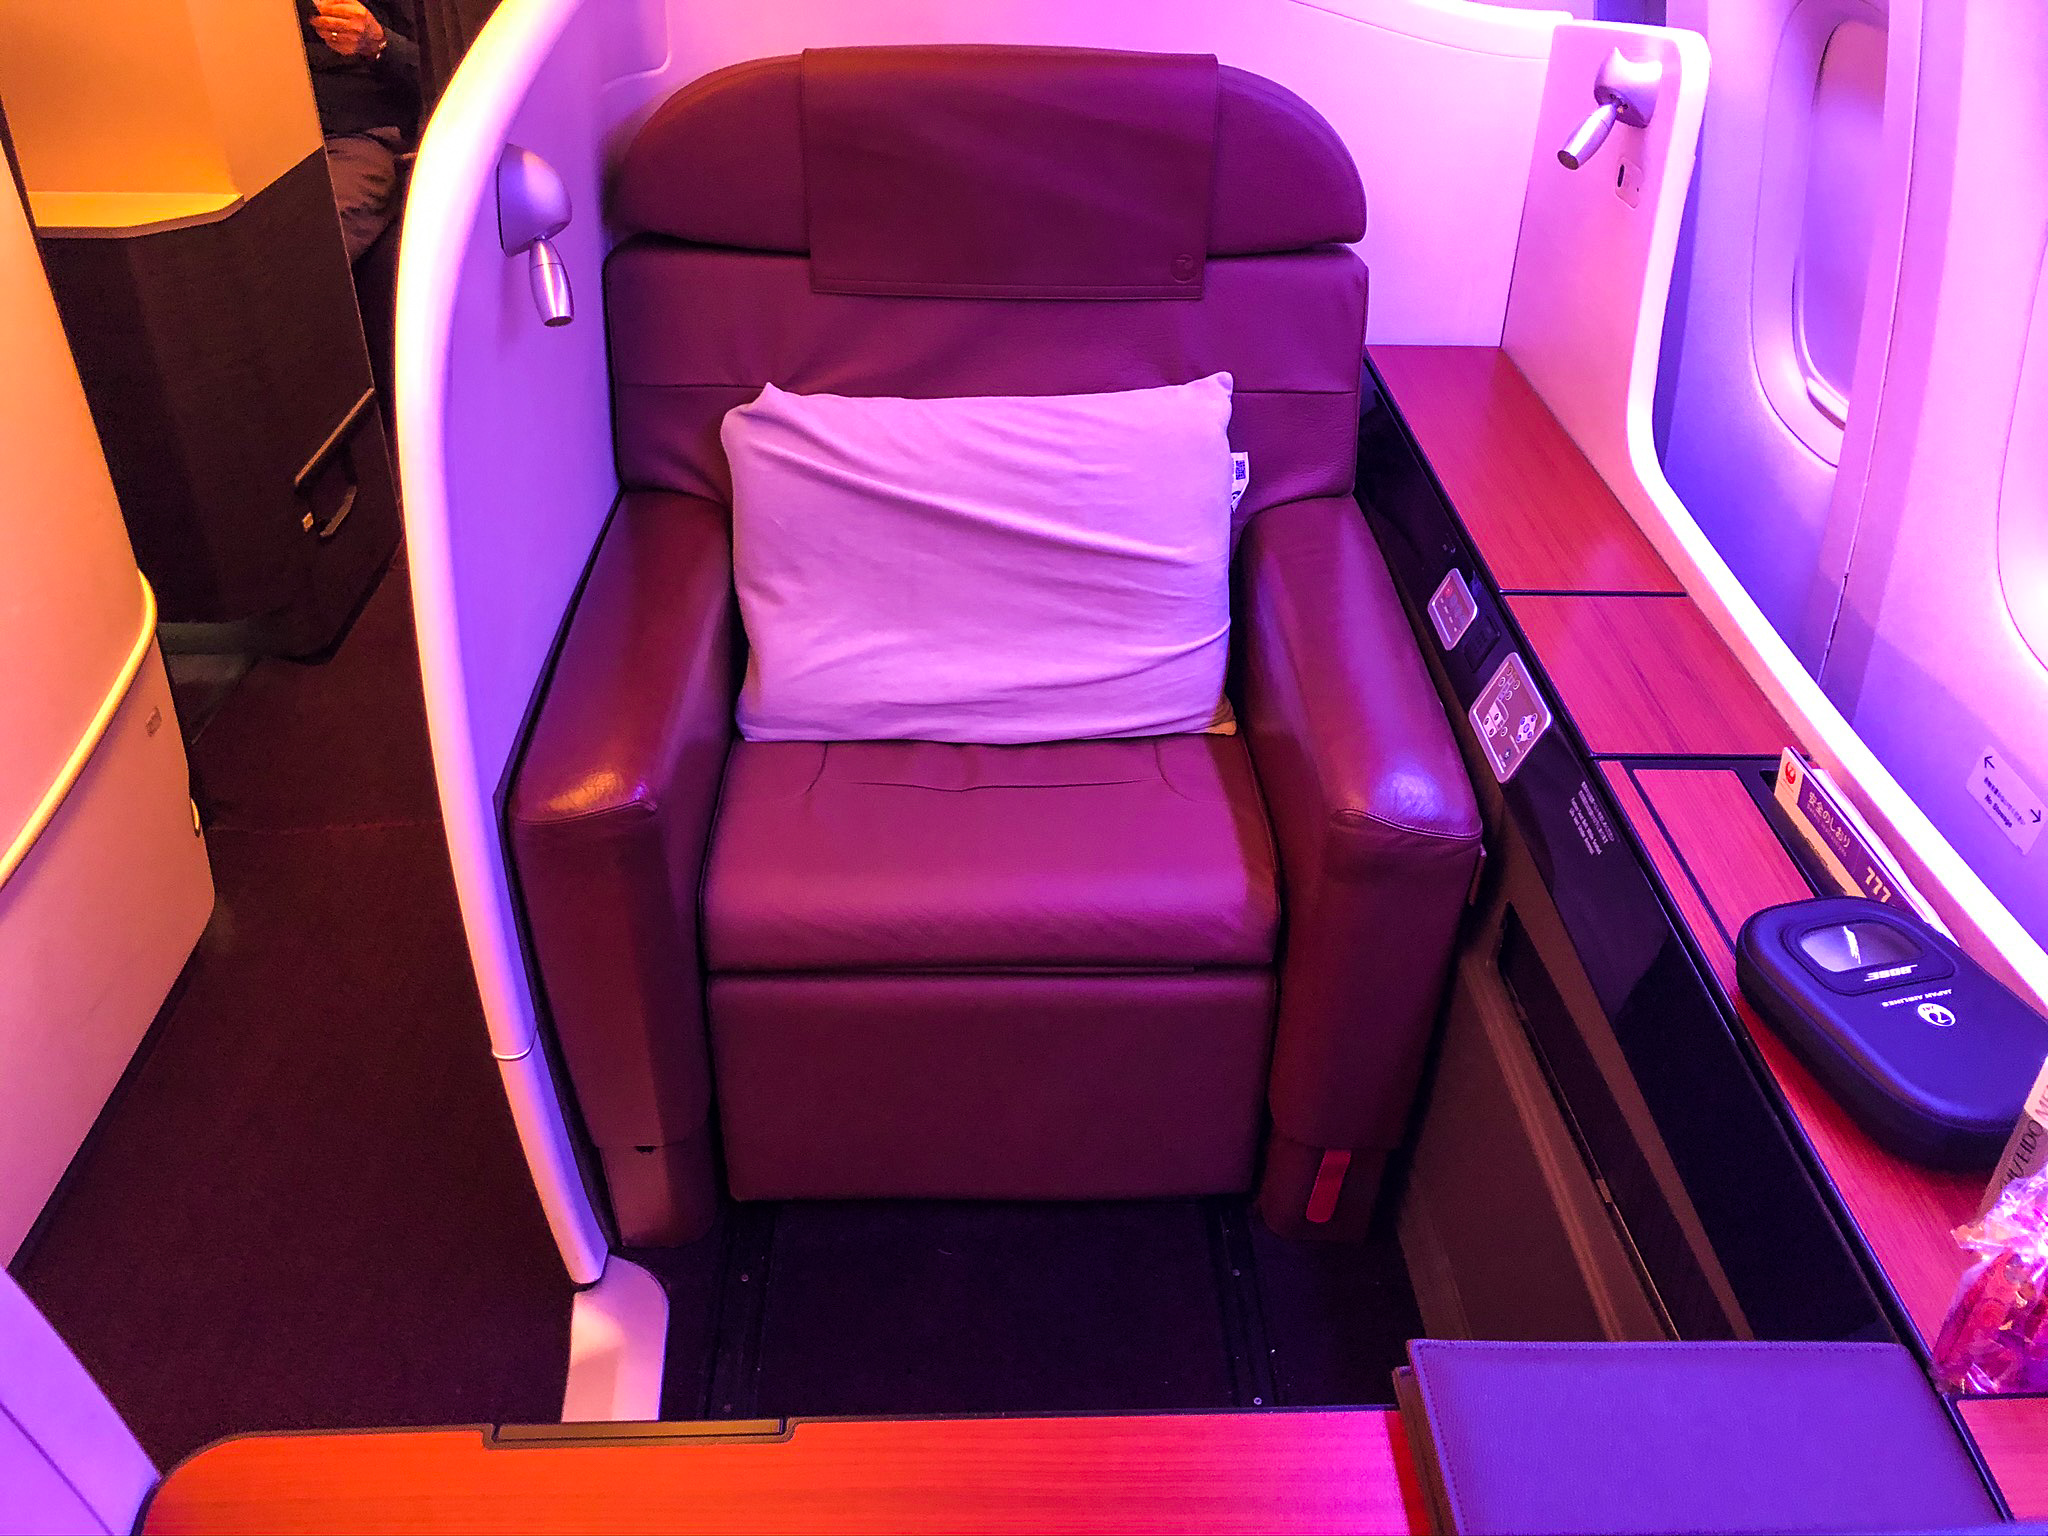 Japan Airlines first class seat